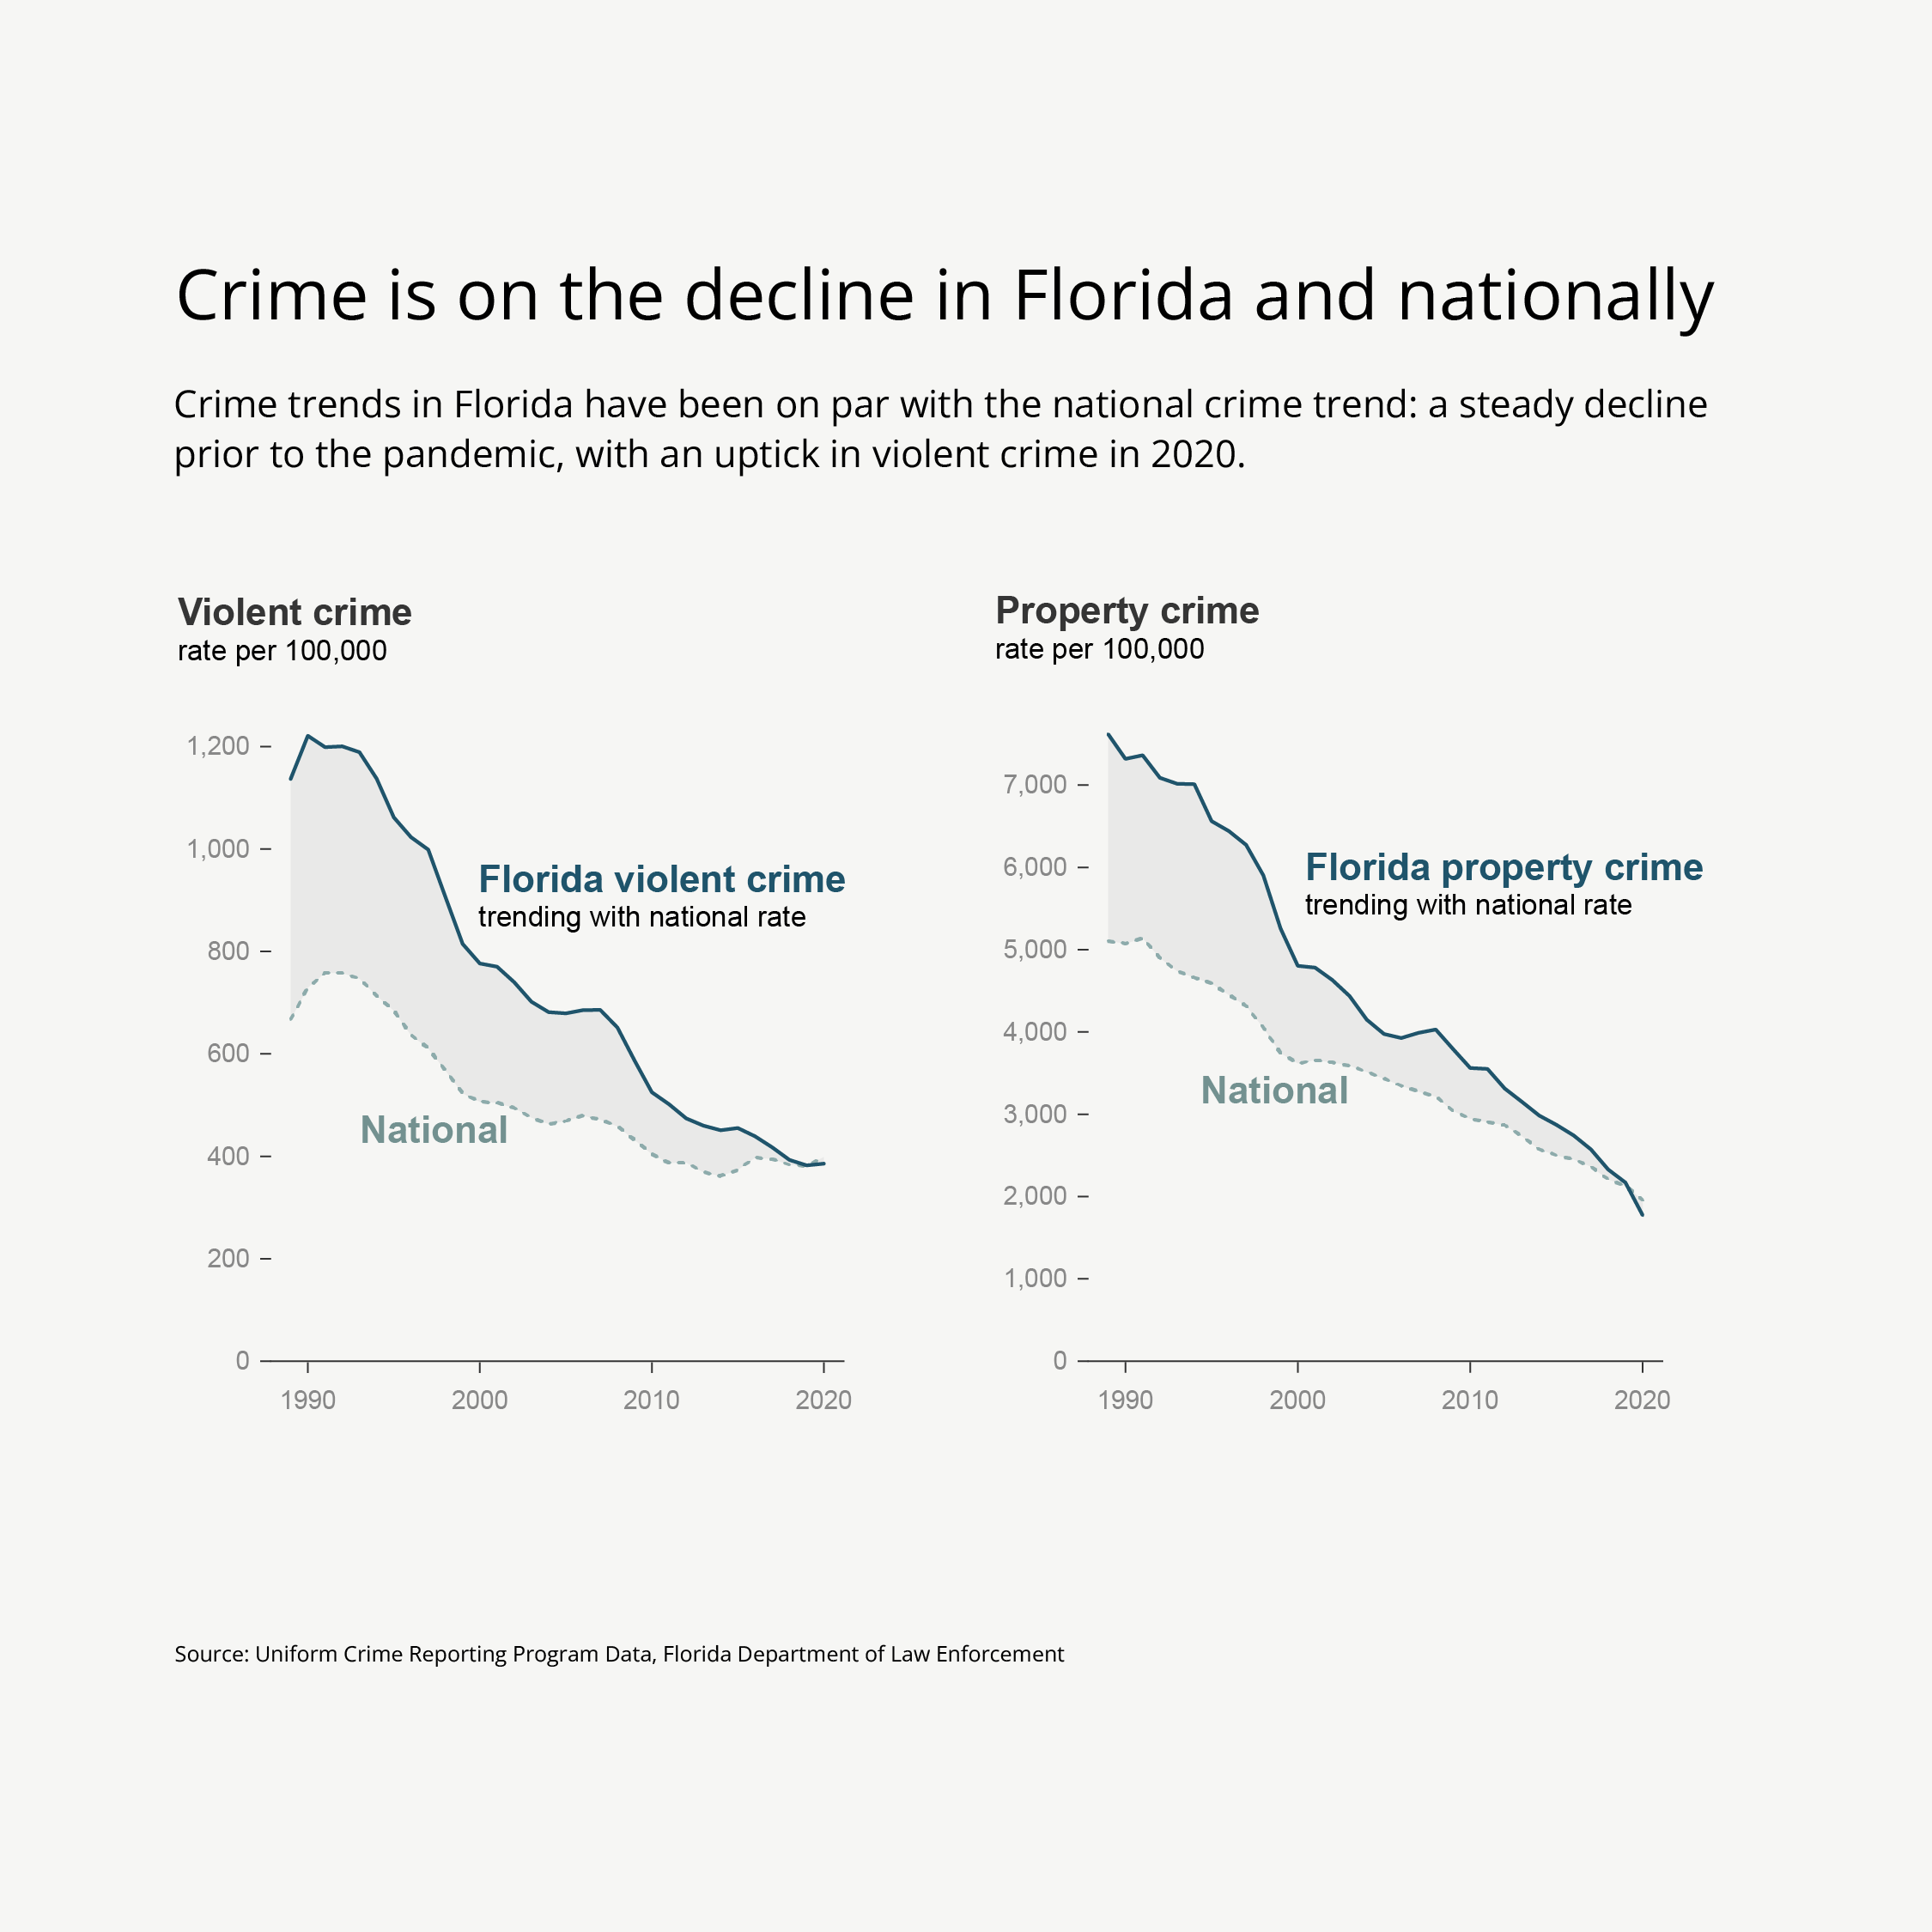 Two line charts show that crime is on the decline in Florida and nationally.